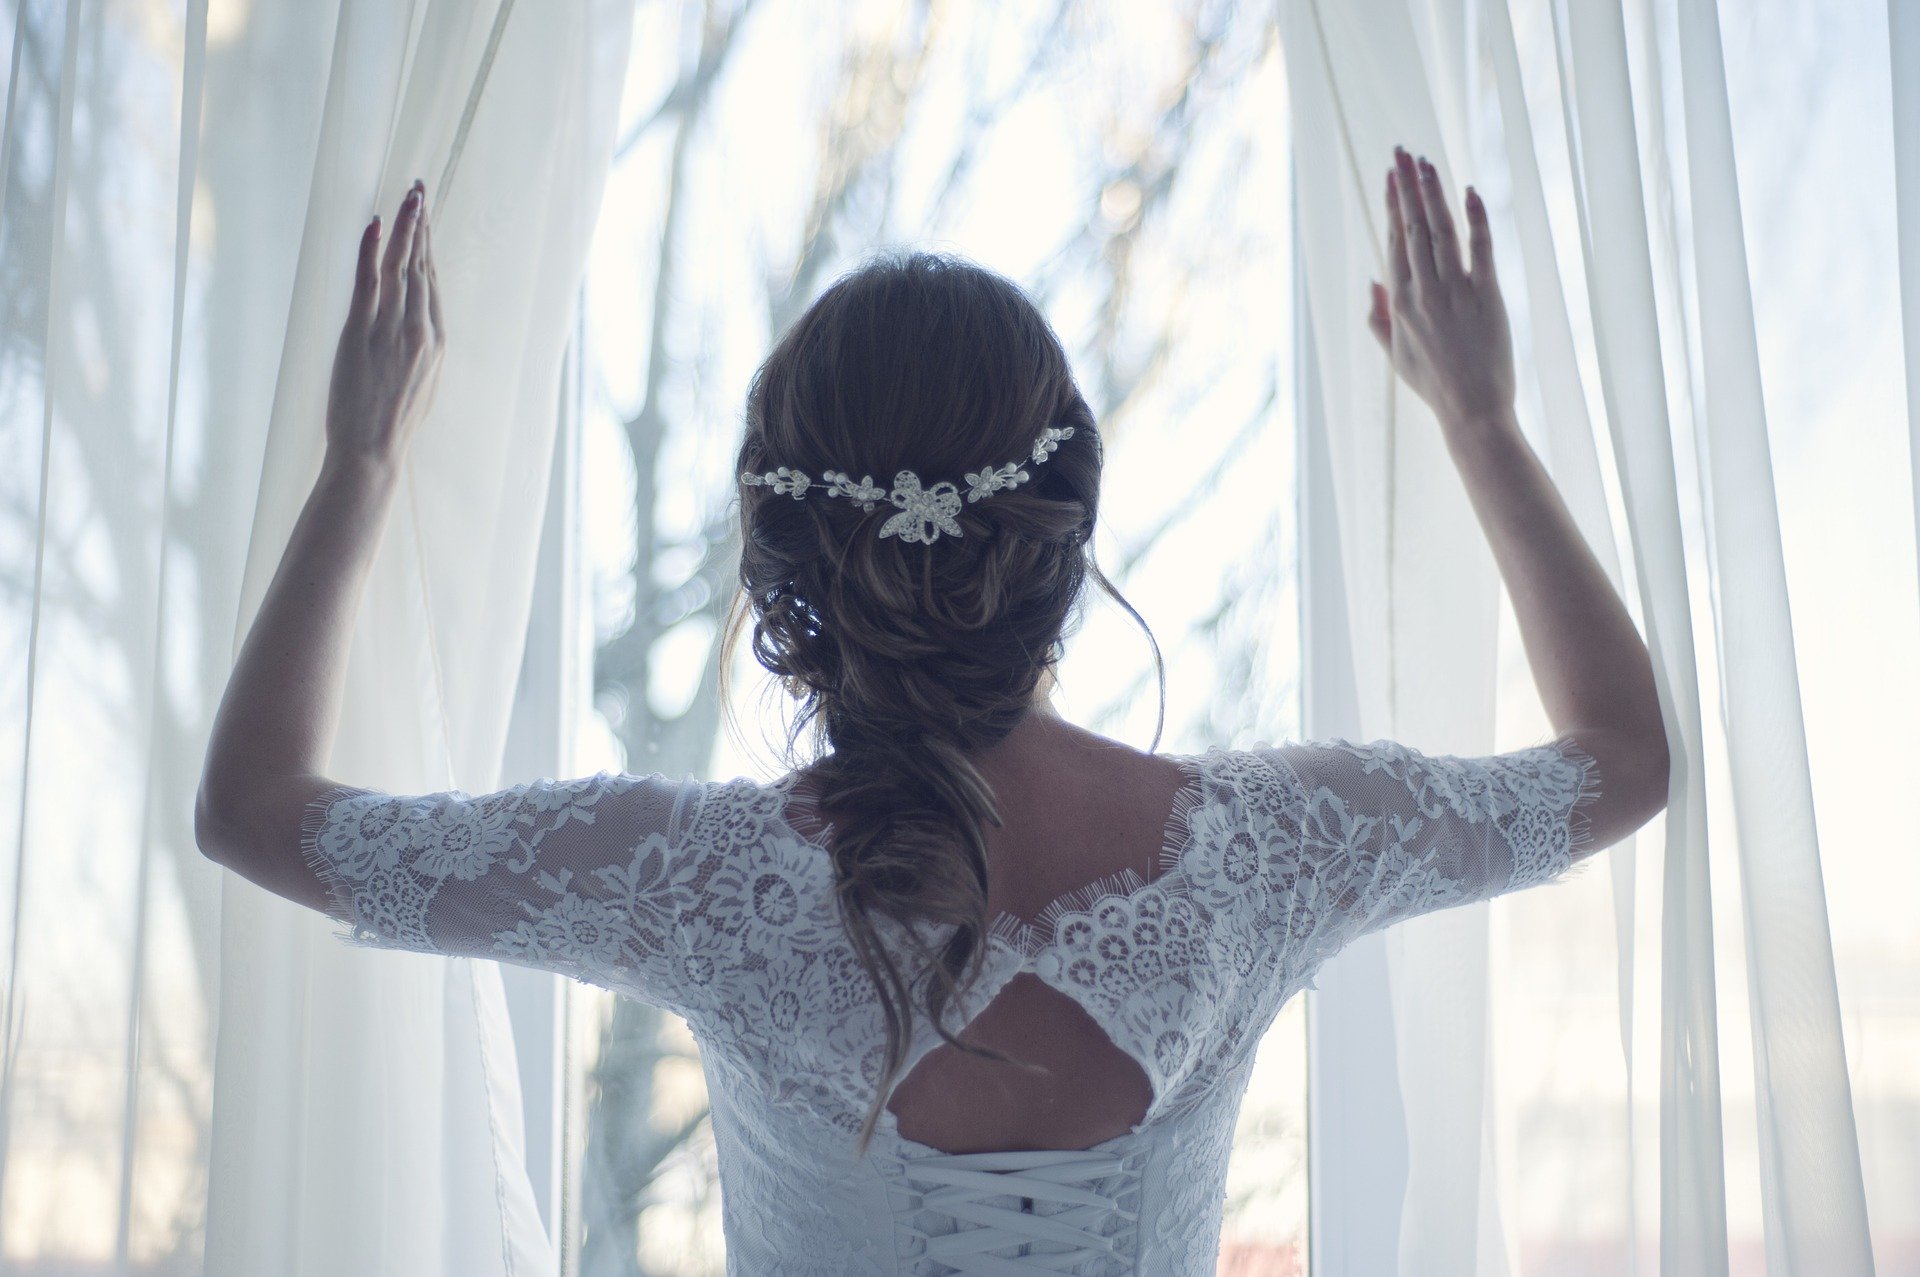 A bride wearing a lace wedding dress by the window. | Source: Pixabay